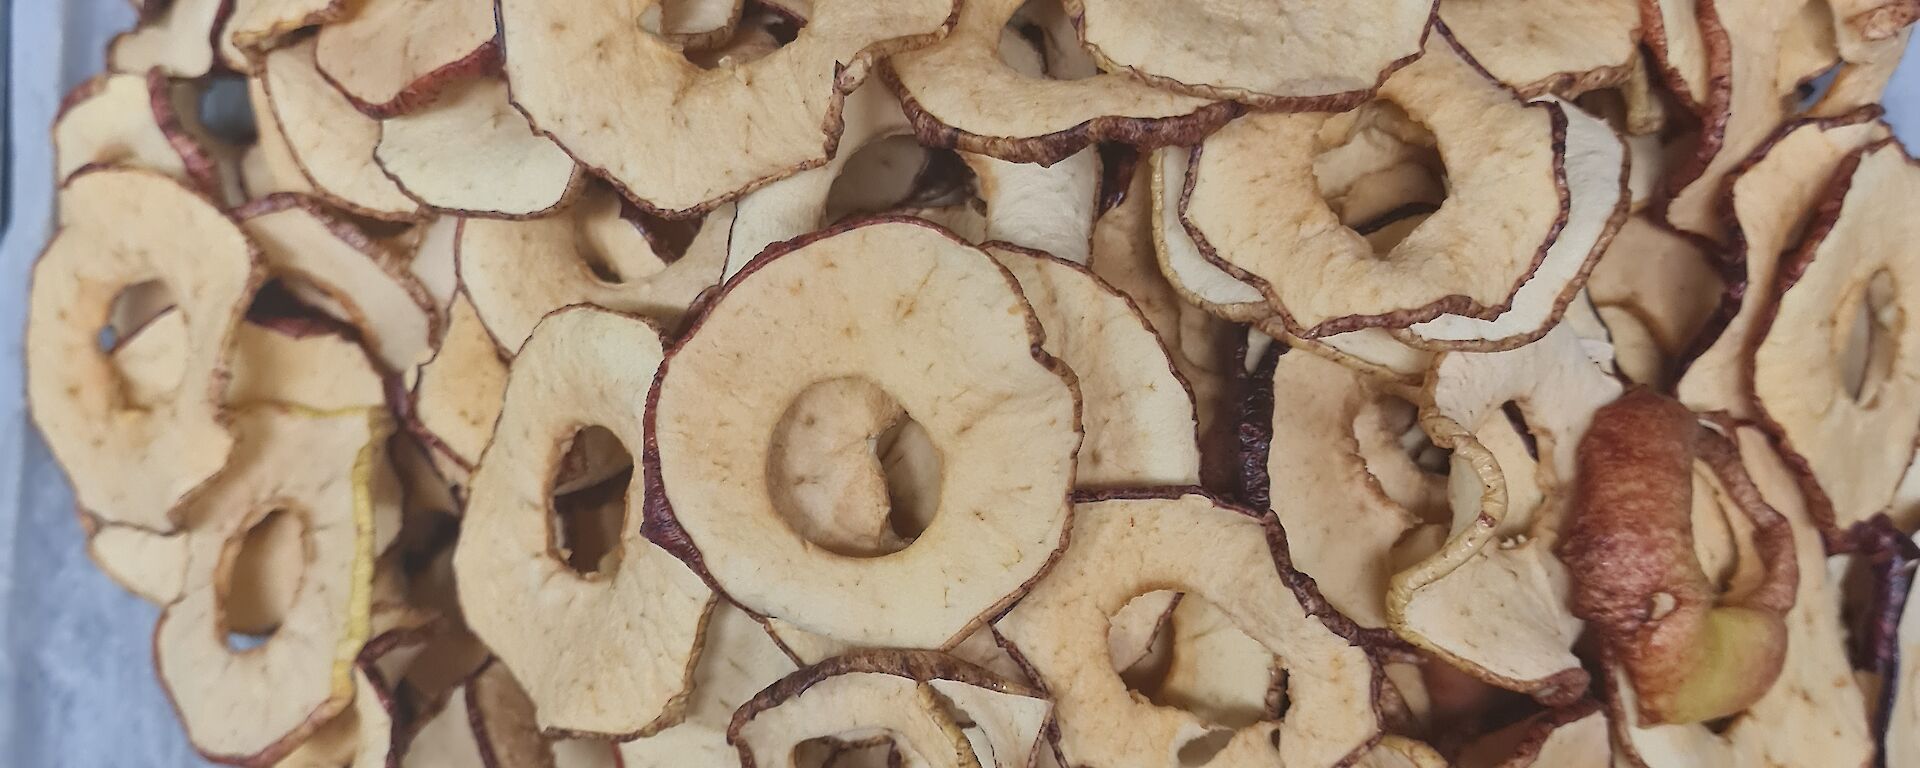 A tray of dehydrated apple slices